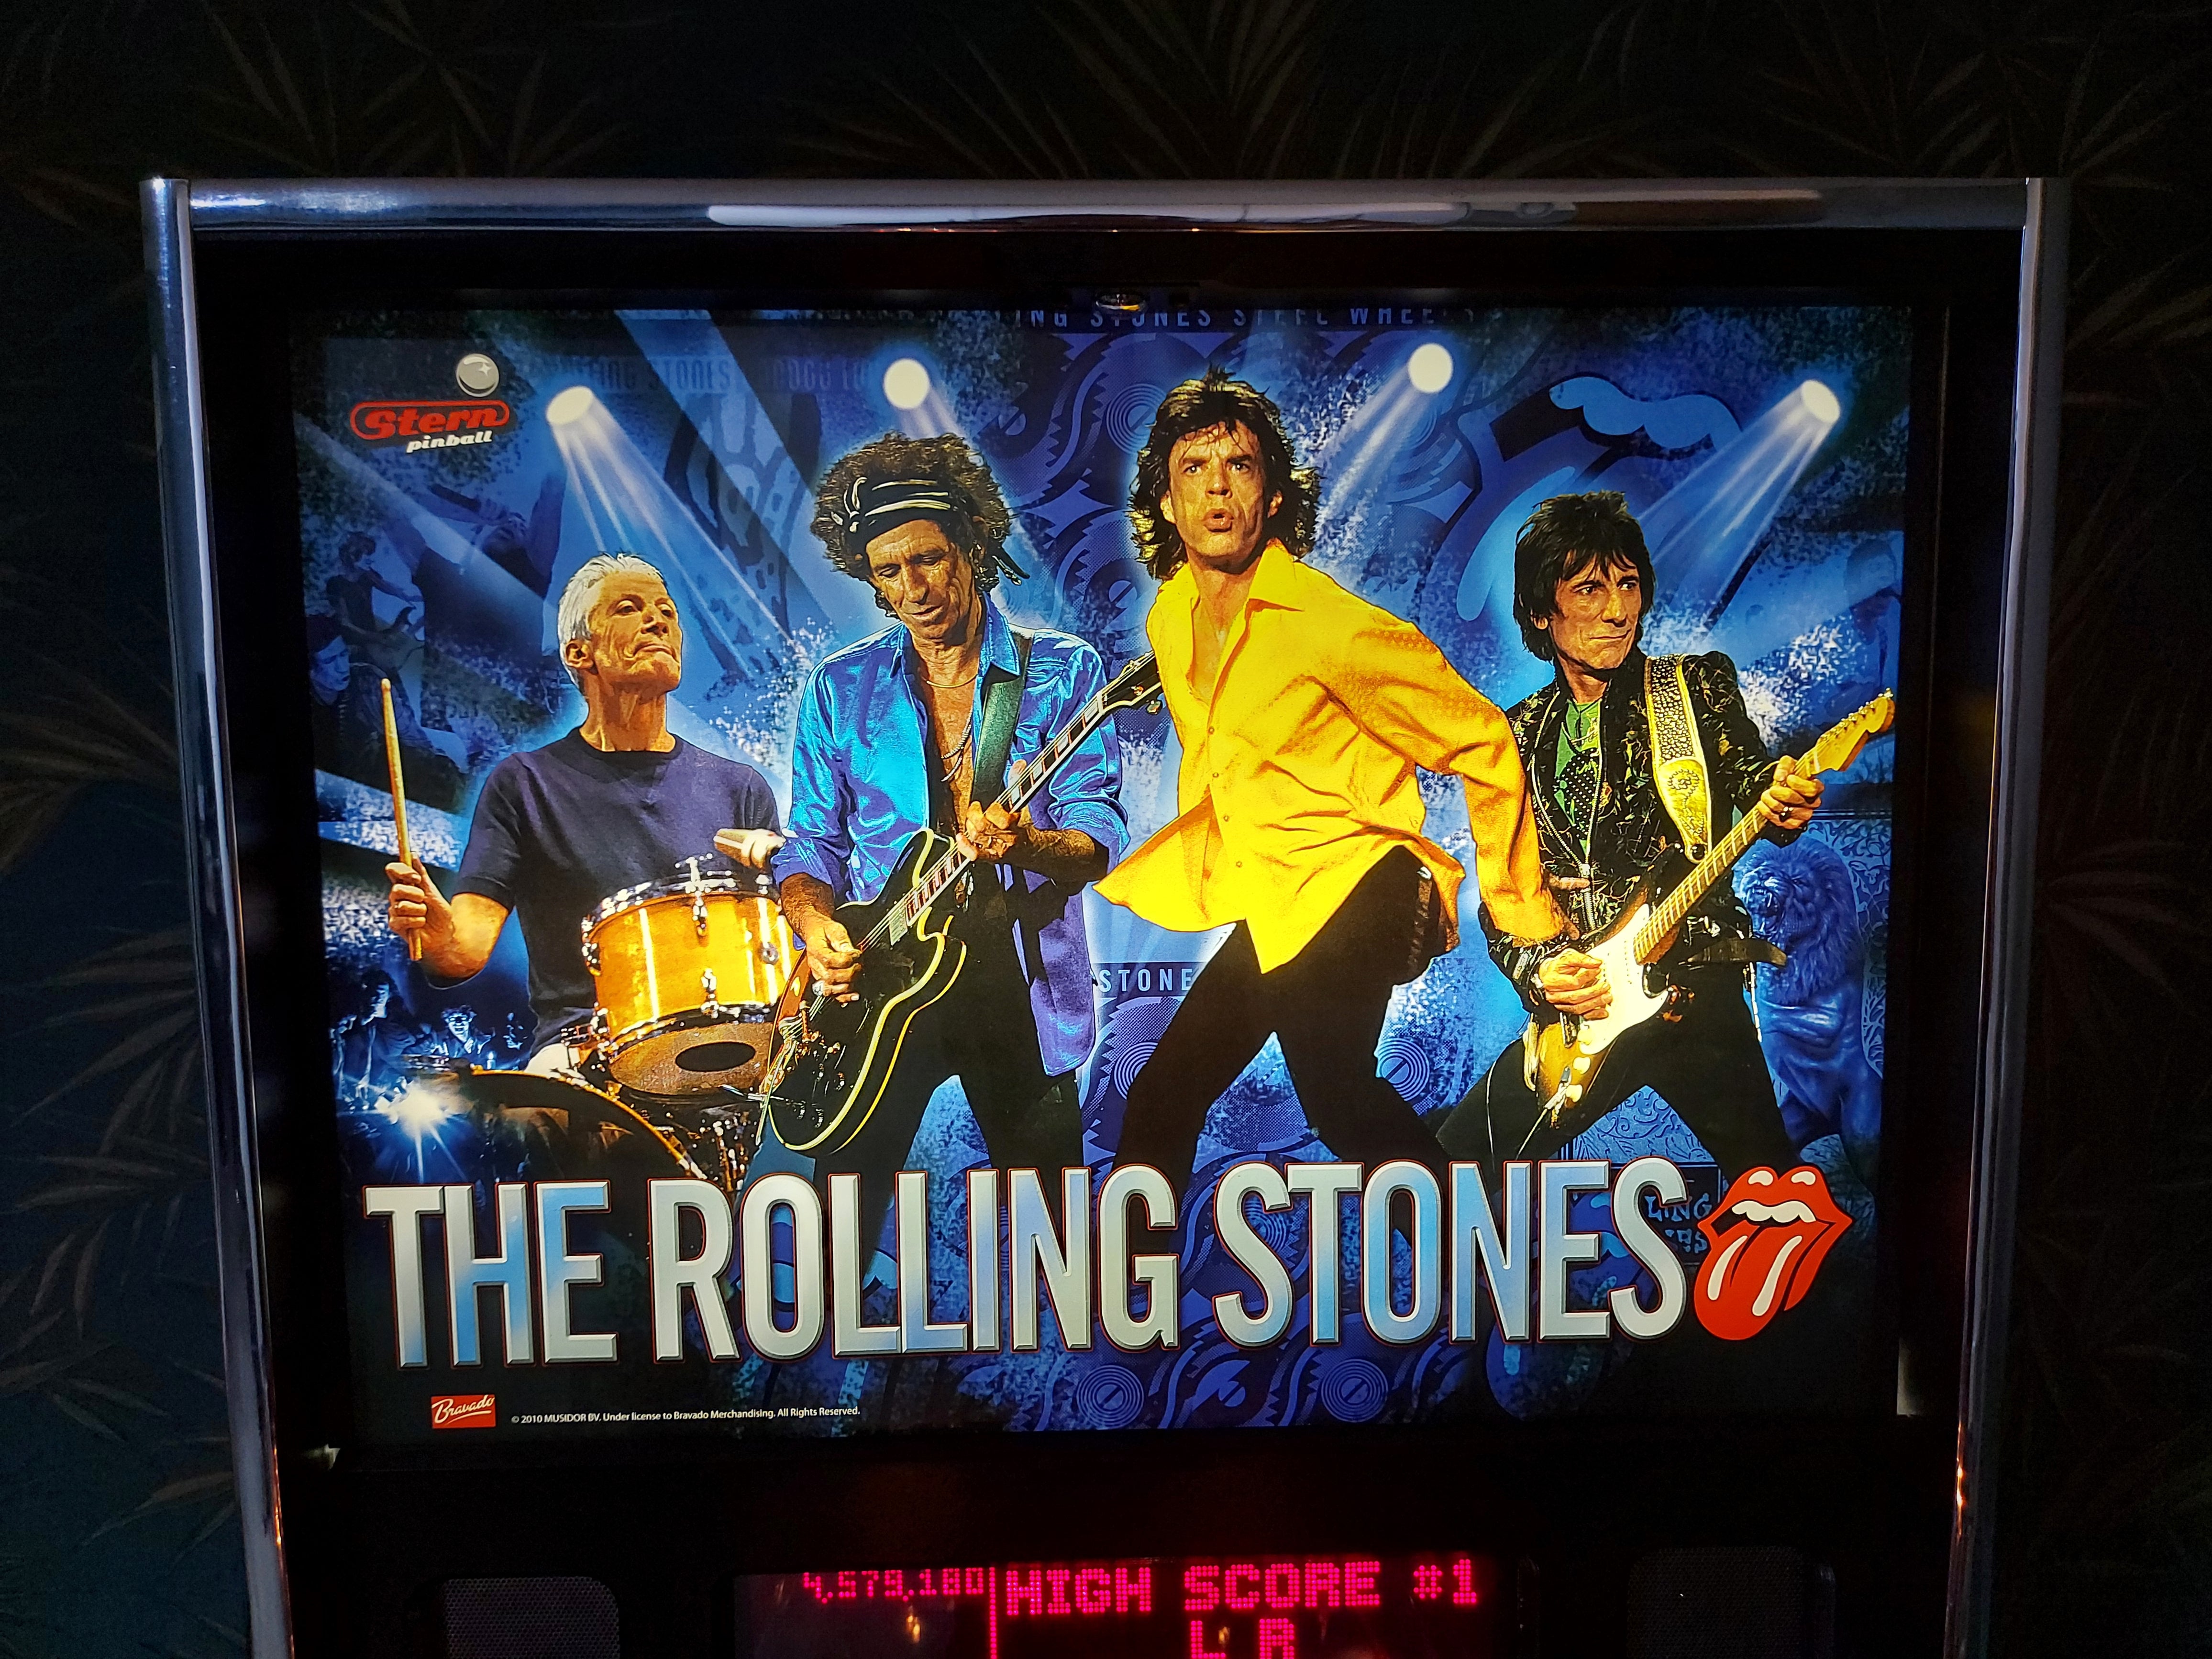 THE ROLLING STONES STERN PINBALL MACHINE GAMES&CO OOSTENDE